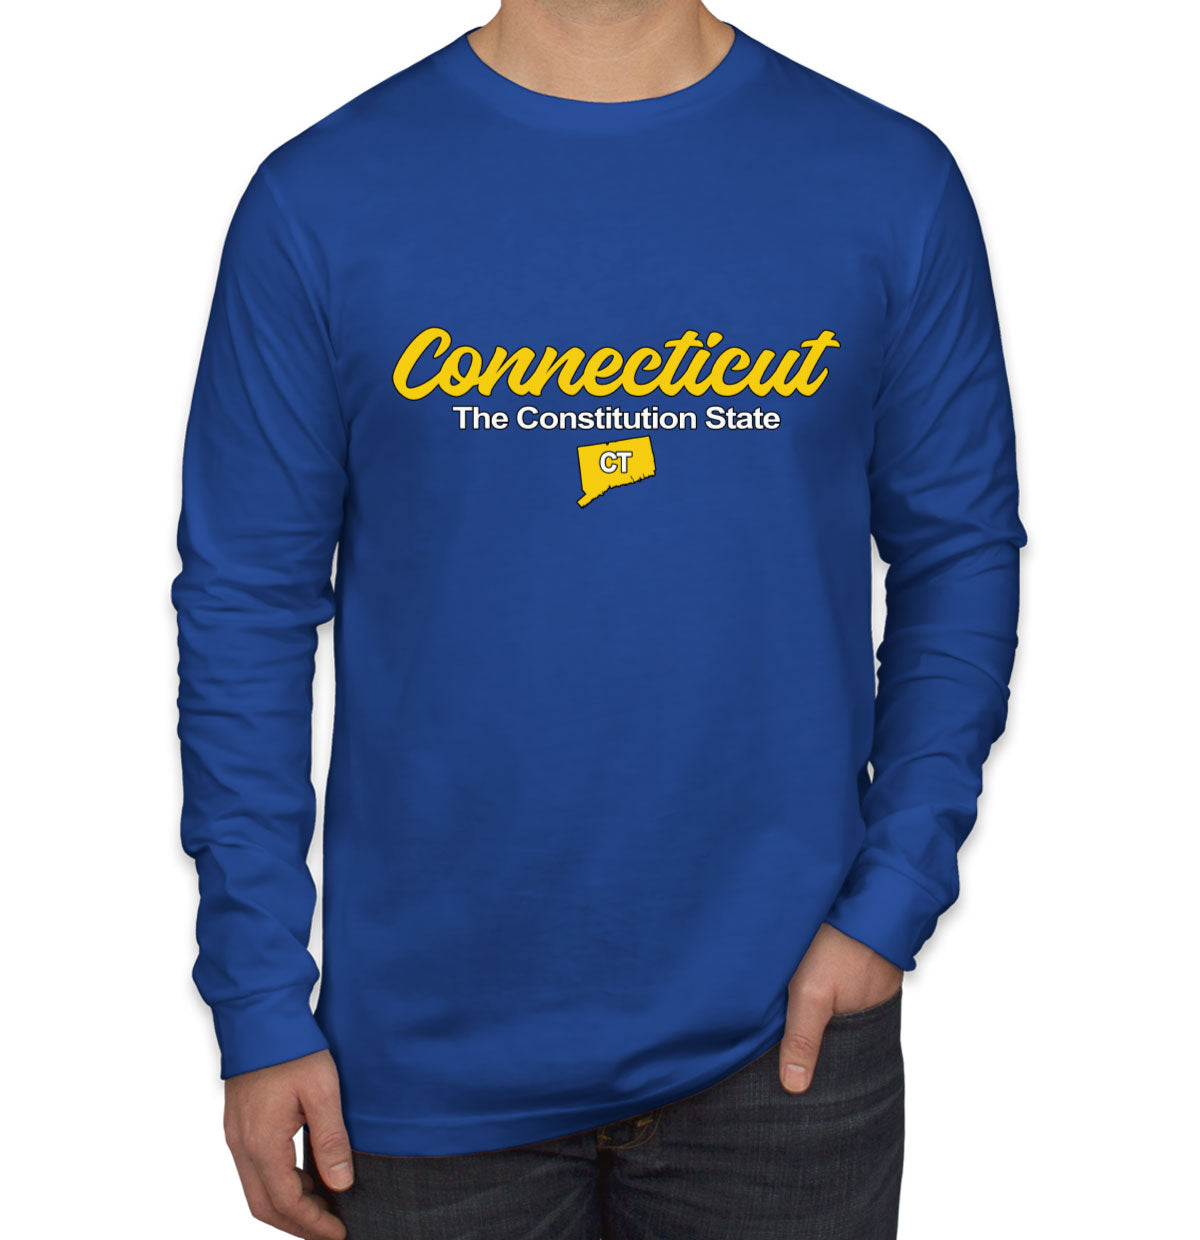 Connecticut The Constitution State Men's Long Sleeve Shirt